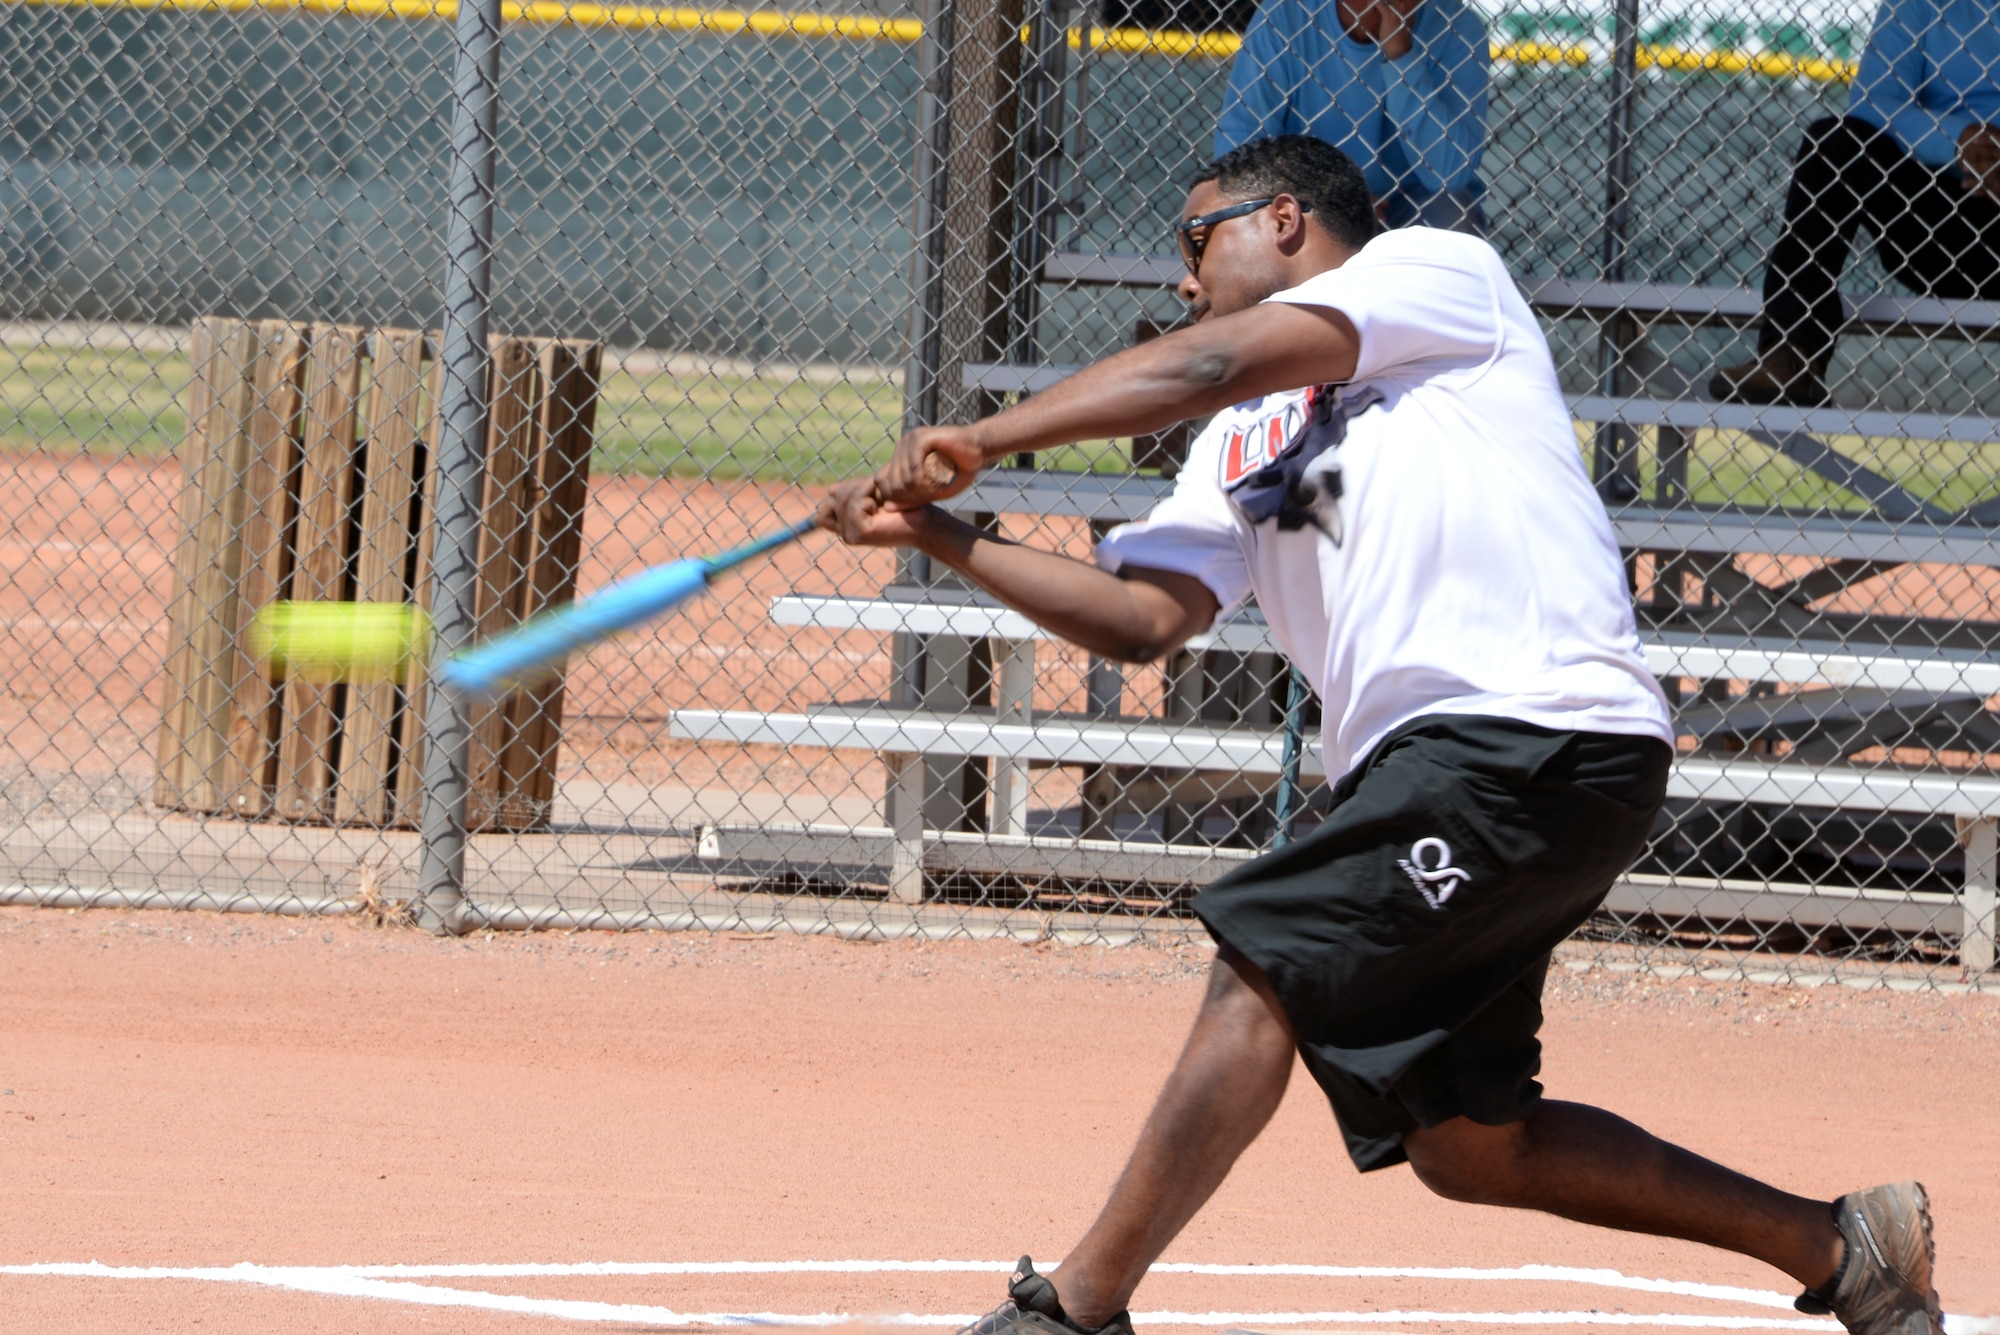 Staff Sgt. Savier Hernandez-Beltre, 56th Component Maintenance Squadron, hits the ball during a scrimmage matchup after the scoreboard ribbon cutting ceremony April 23, 2018, at Luke Air Force Base, Ariz. The Diamondbacks, together with Arizona Public Service, presented Luke AFB with a new scoreboard for field number three. (U.S. Air Force photo by Senior Airman Devante Williams)